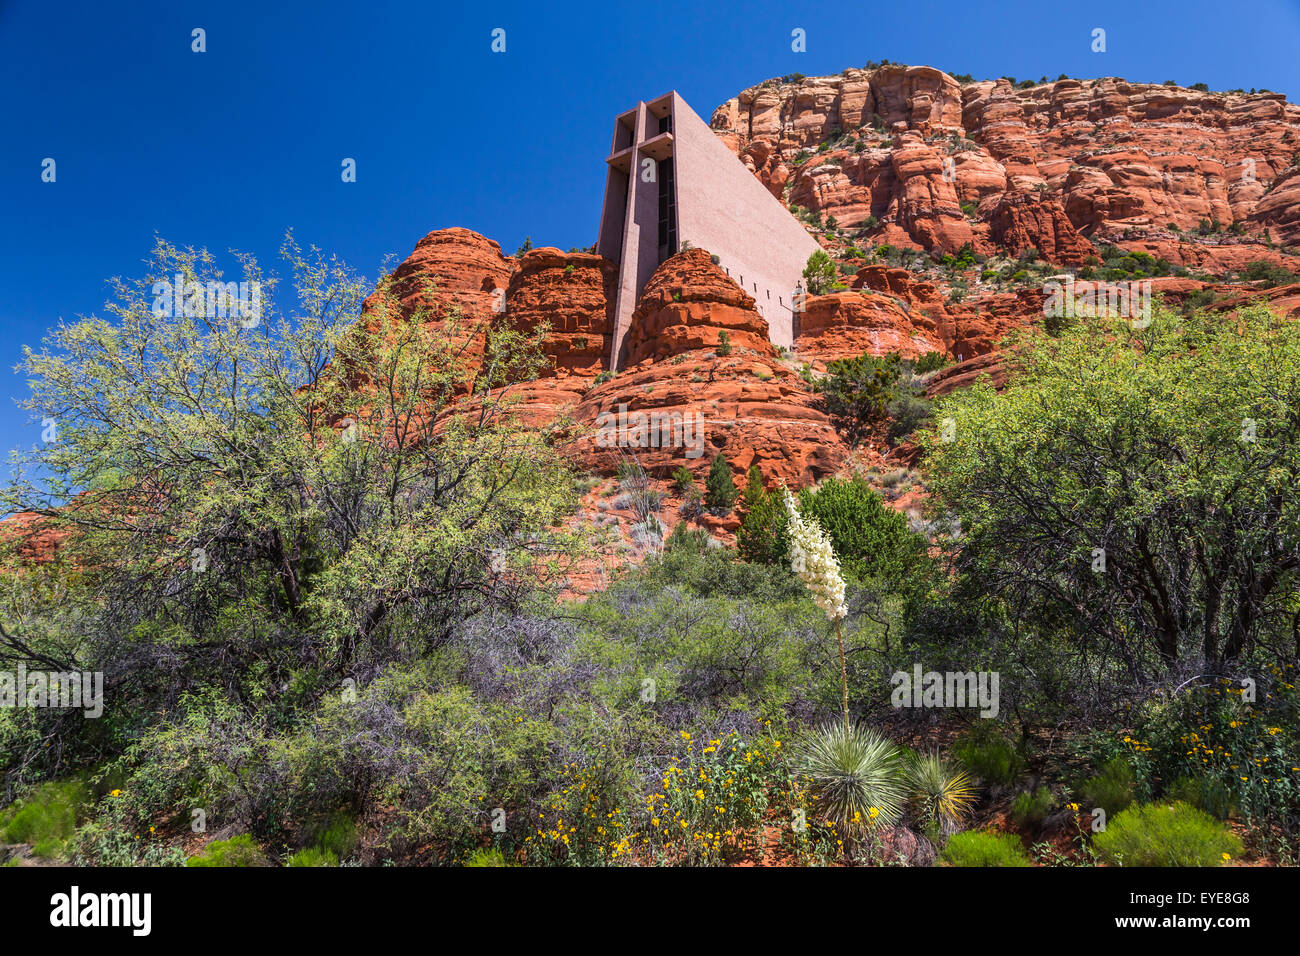 The Chapel of the Holy Cross in the red buttes of Sedona, Arizona, USA. Stock Photo